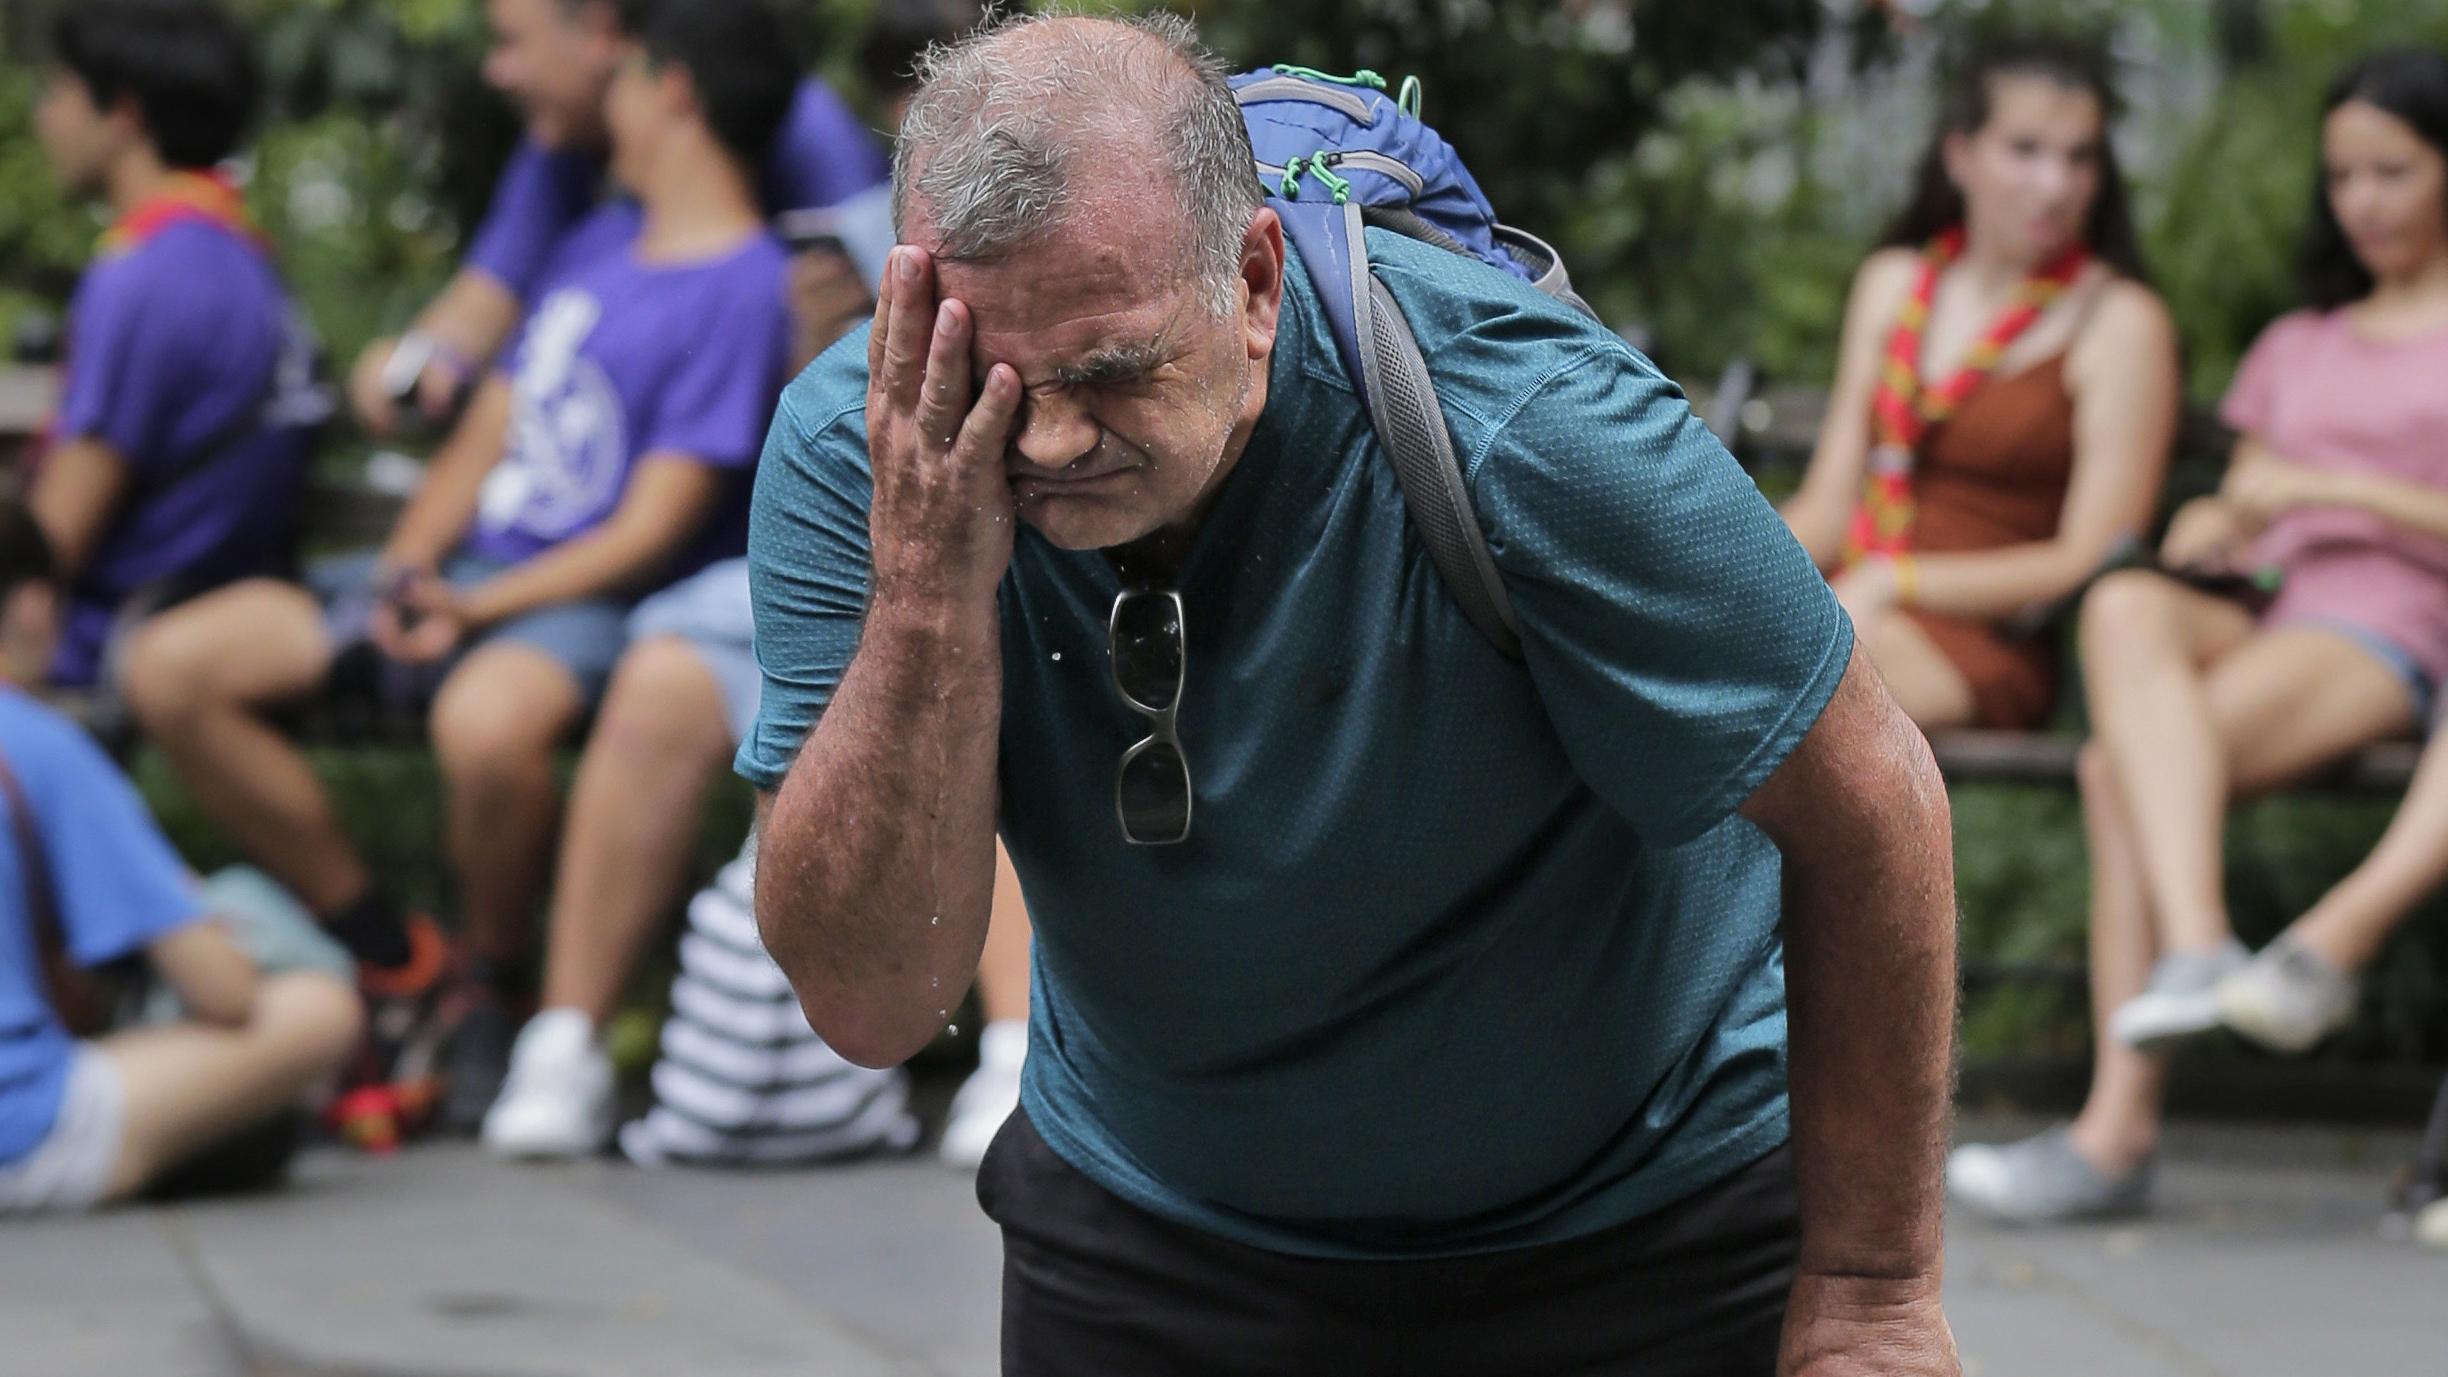 Russ Wilson splashes water on his face from a fountain in New York, Wednesday, July 17, 2019. The heat wave that has been roasting much of the U.S. in recent days is just getting warmed up, with temperatures expected to soar to dangerous levels through the weekend. (AP Photo / Seth Wenig)